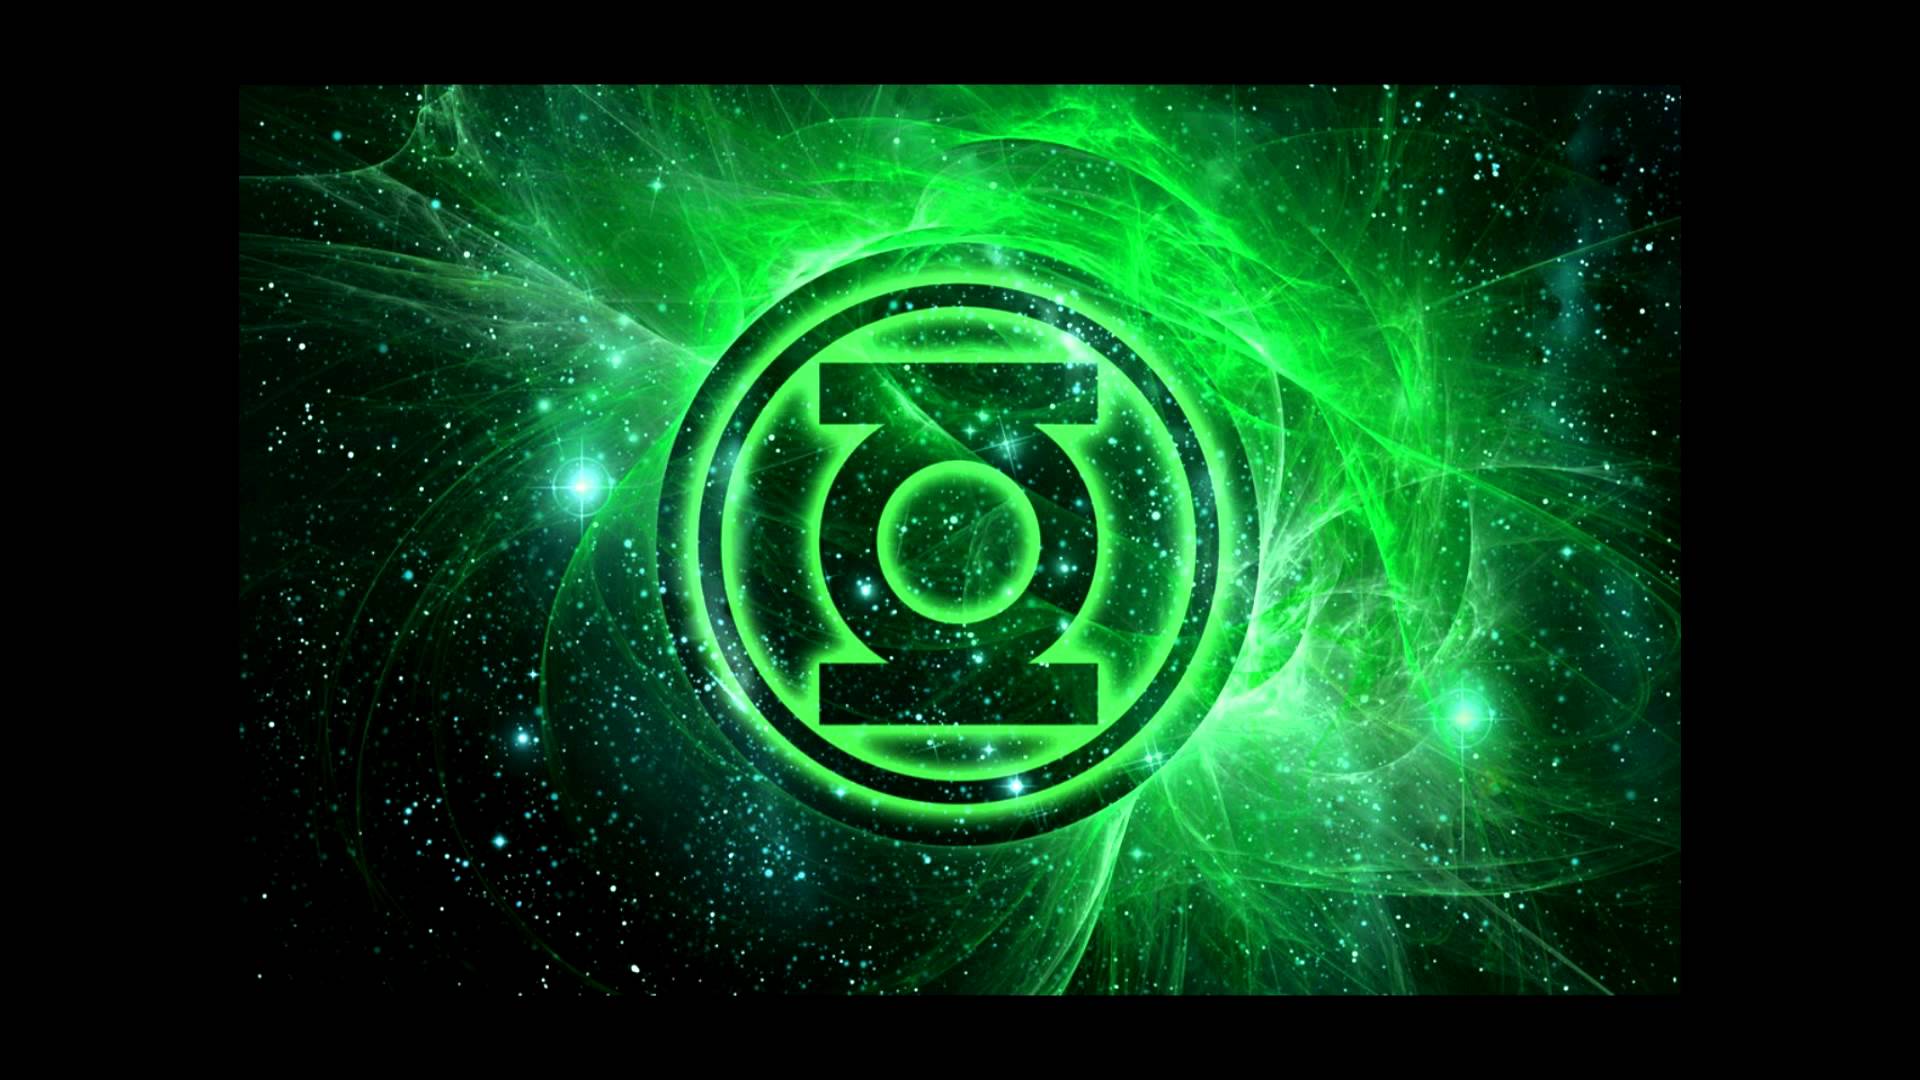 Green Lantern Corps Backgrounds, Compatible - PC, Mobile, Gadgets| 1920x1080 px